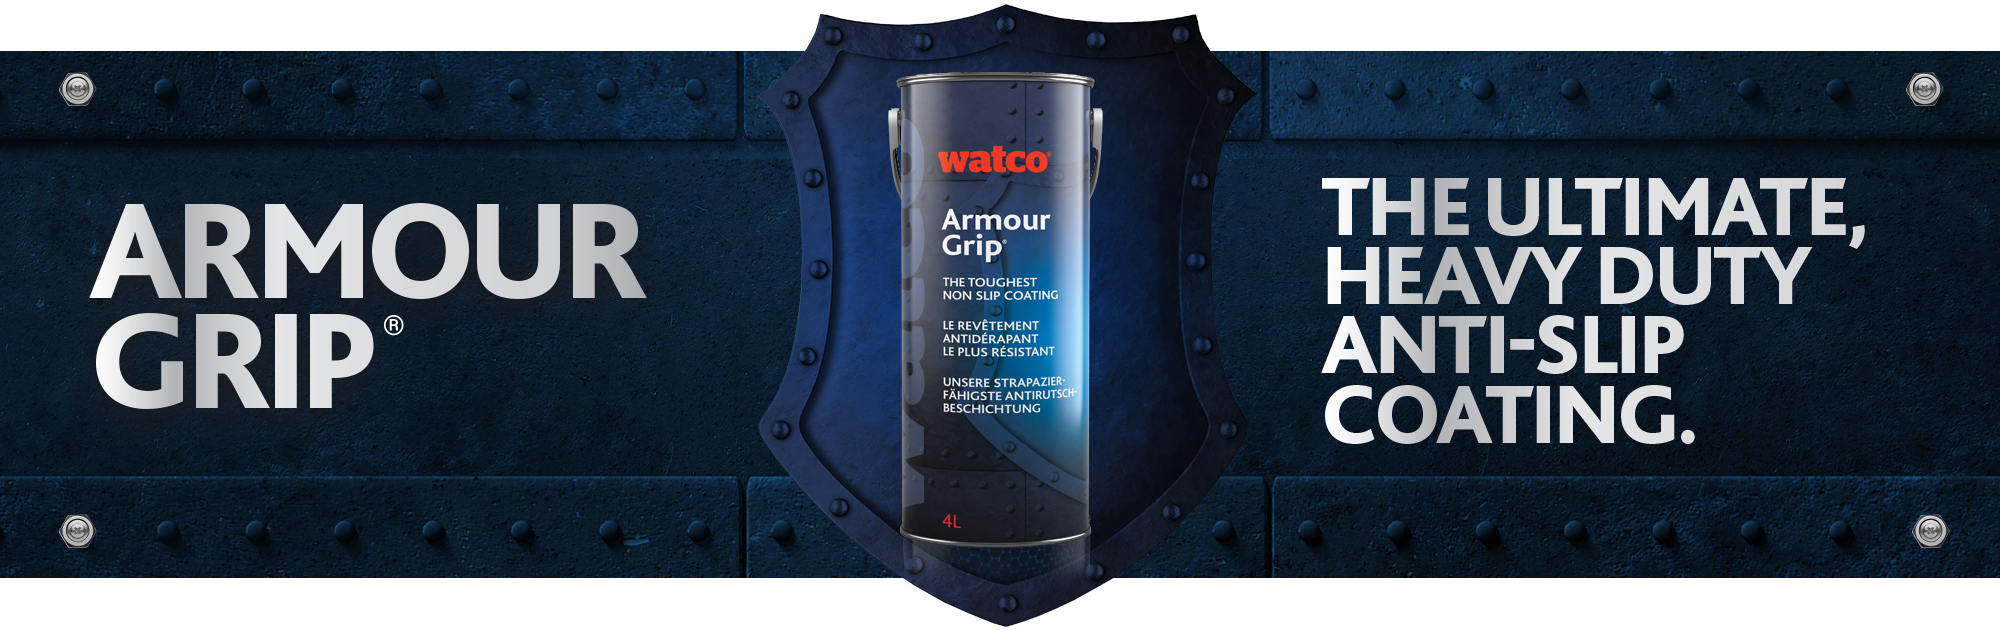 ArmourGrip The ultimate heavy duty anti slip coating